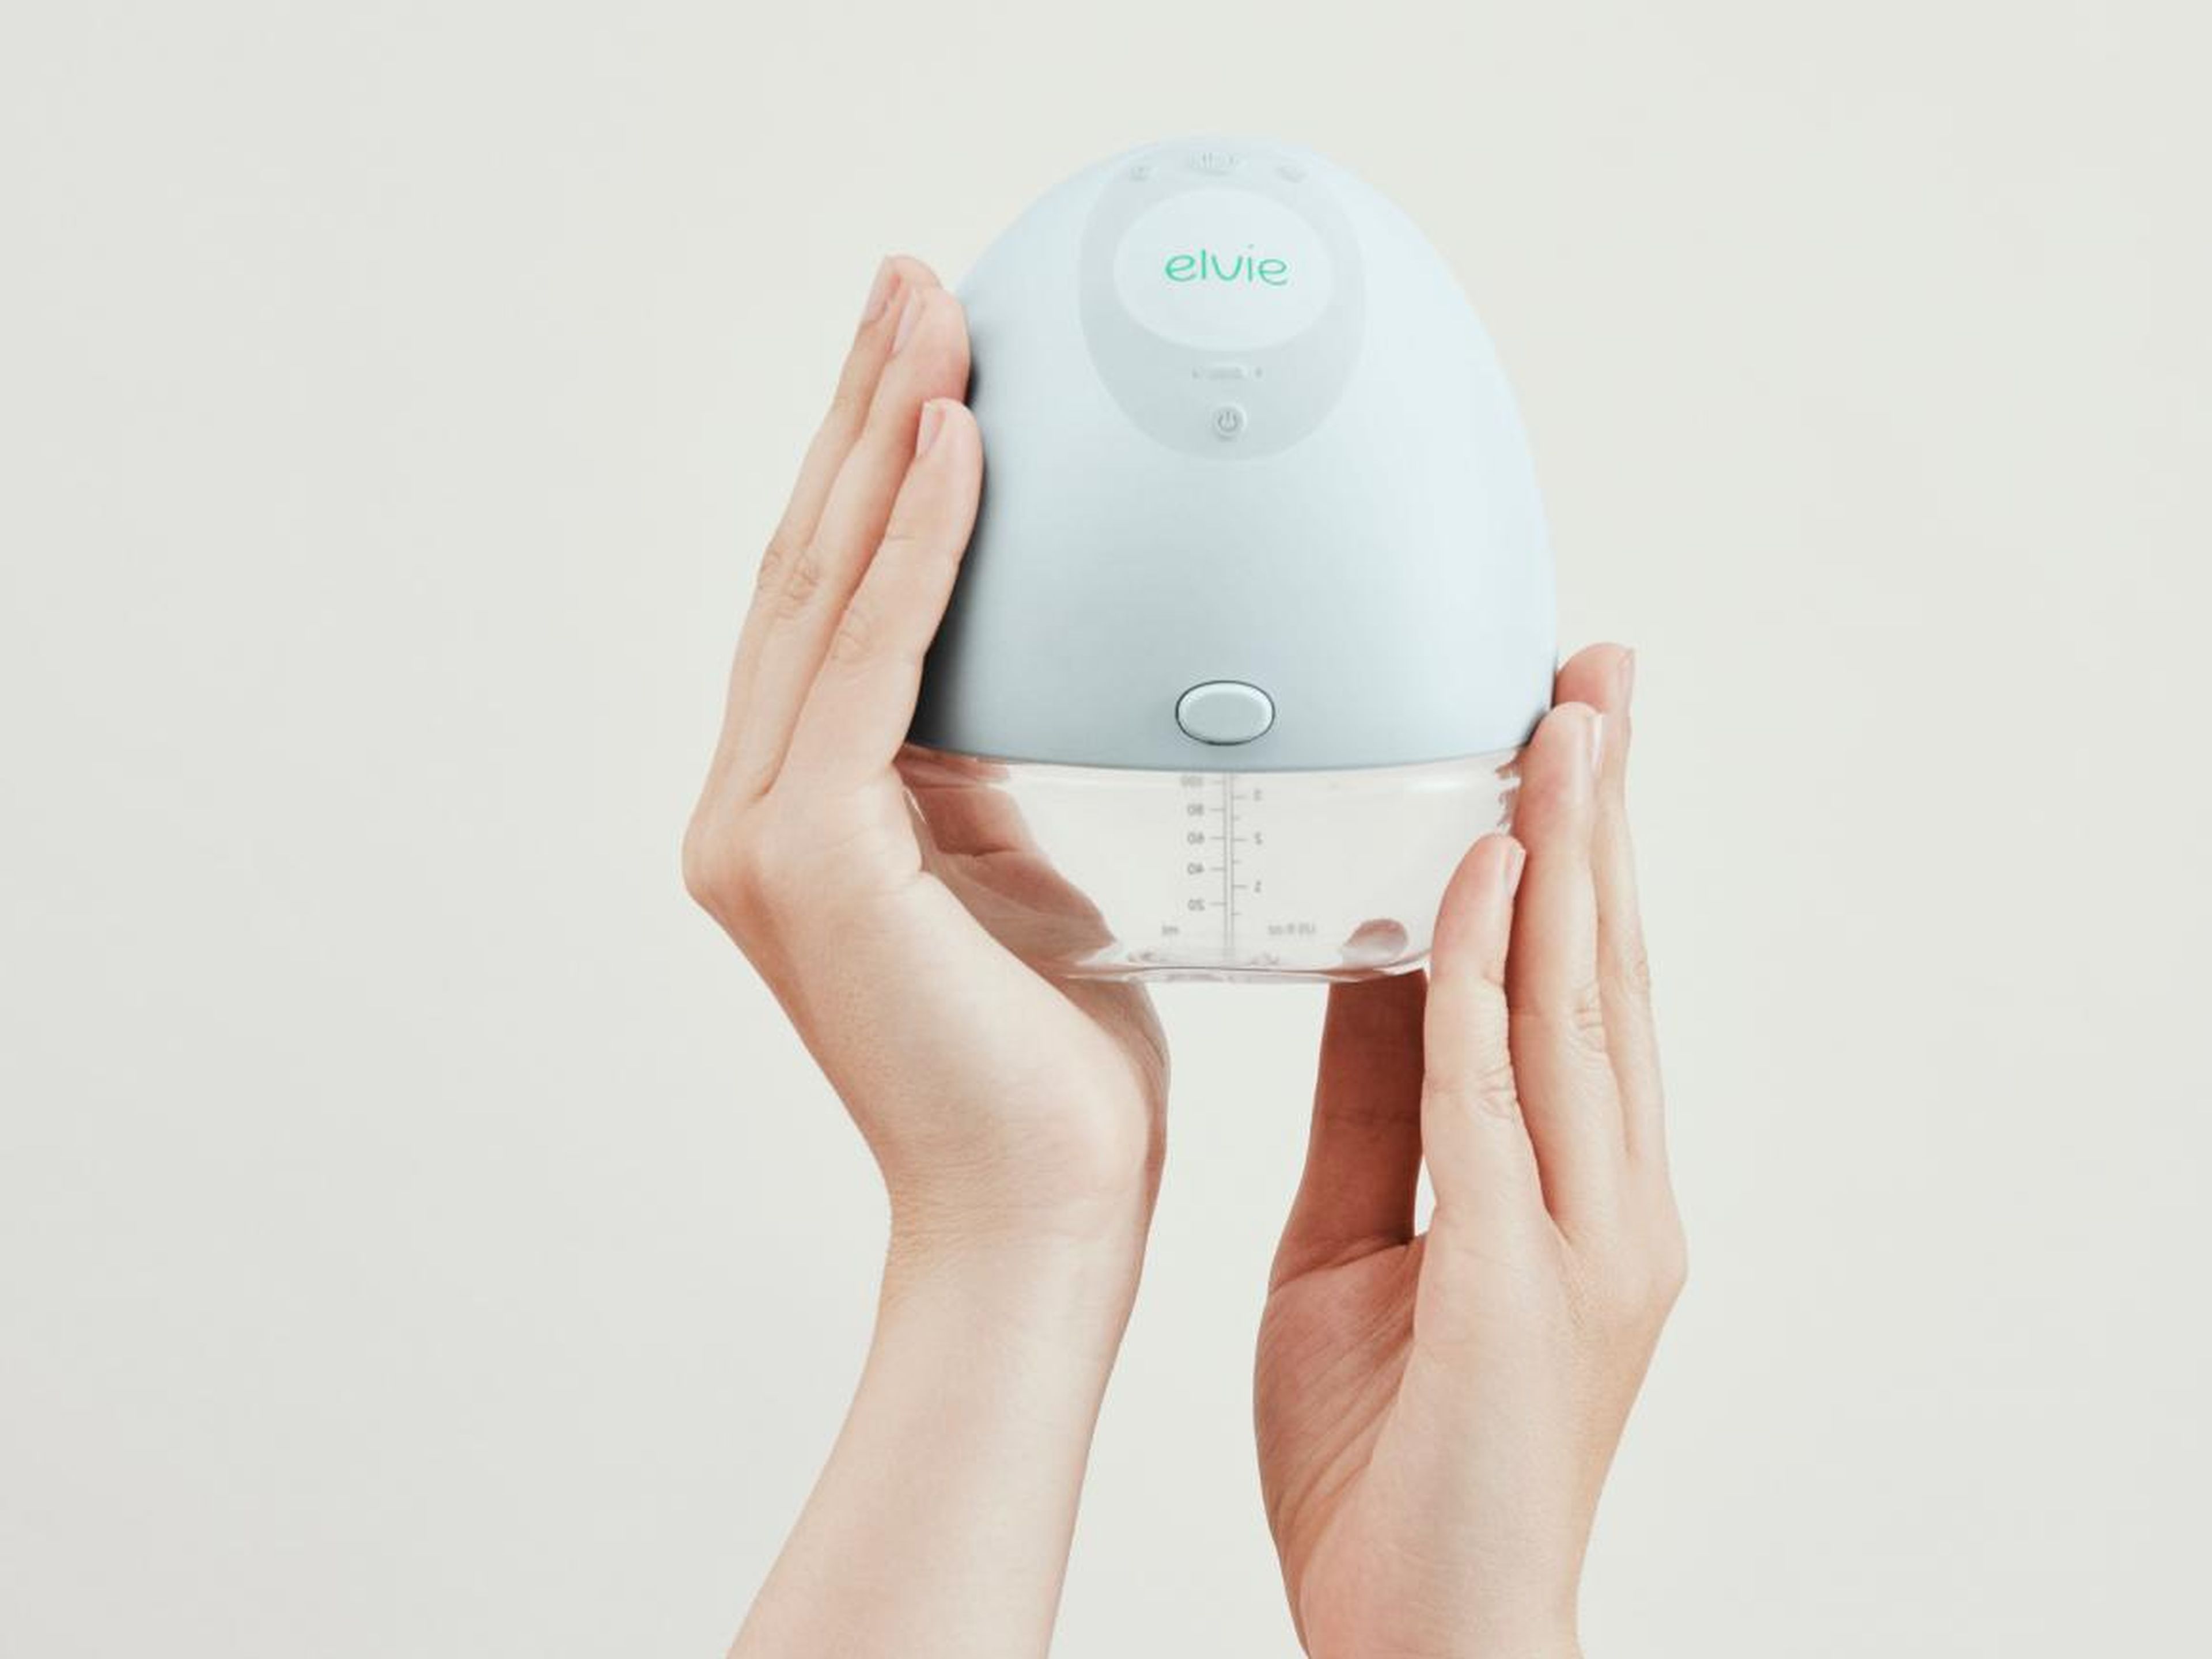 The Elvie Pump (pictured) is a portable, wearable breast pump.